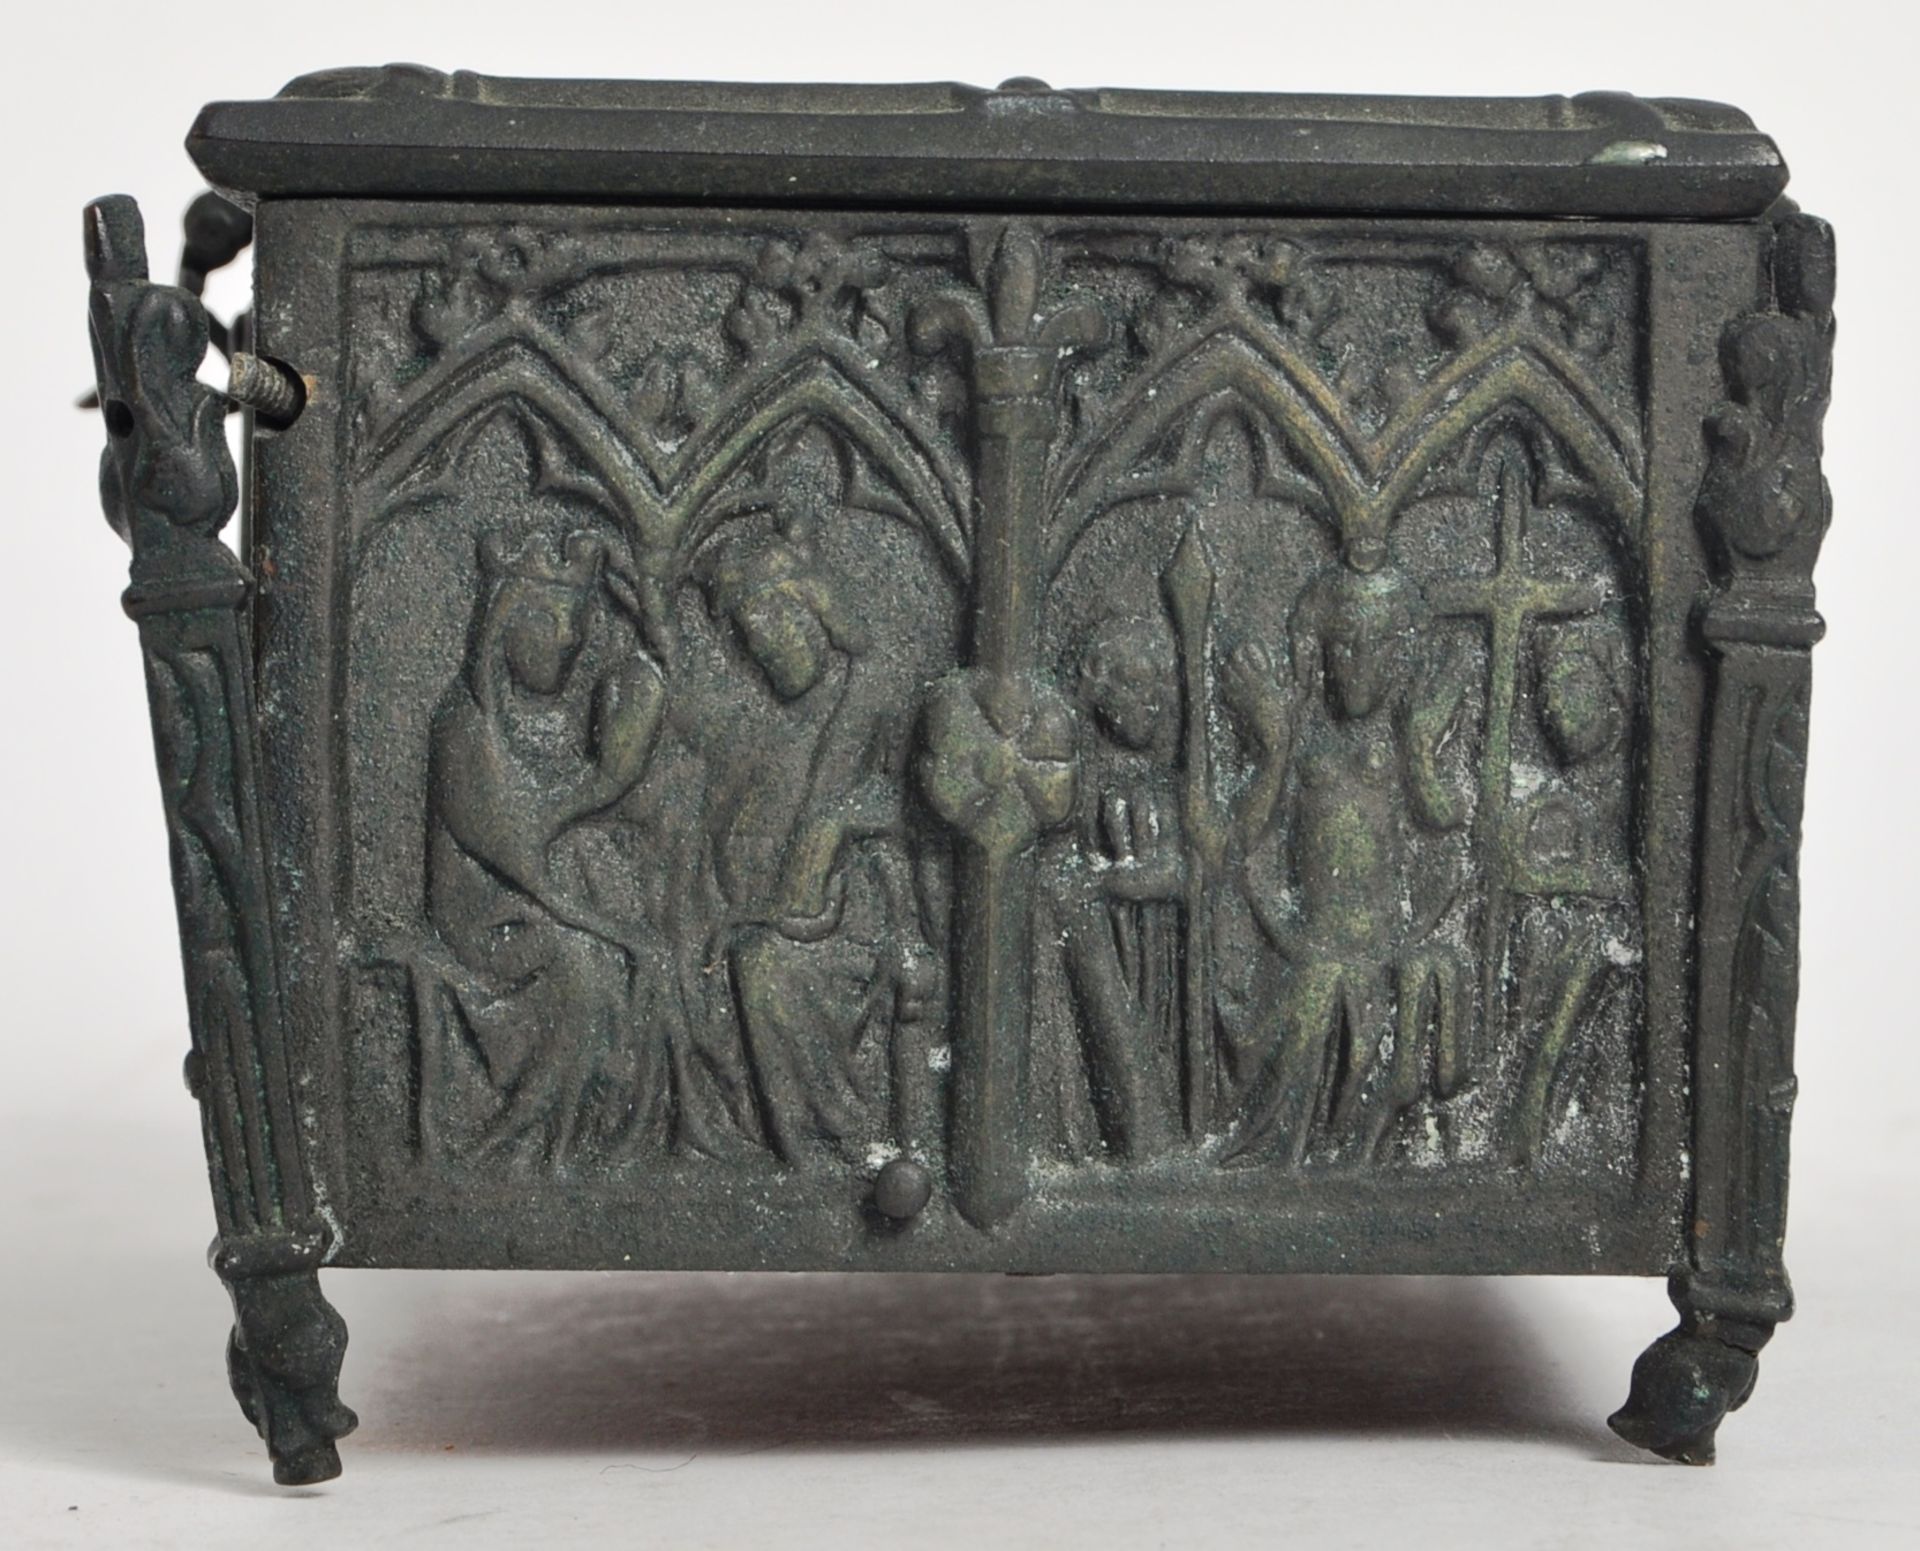 SMALL NINETEENTH CENTURY BRONZE CASKET WITH GOTHIC INLAY - Image 3 of 7